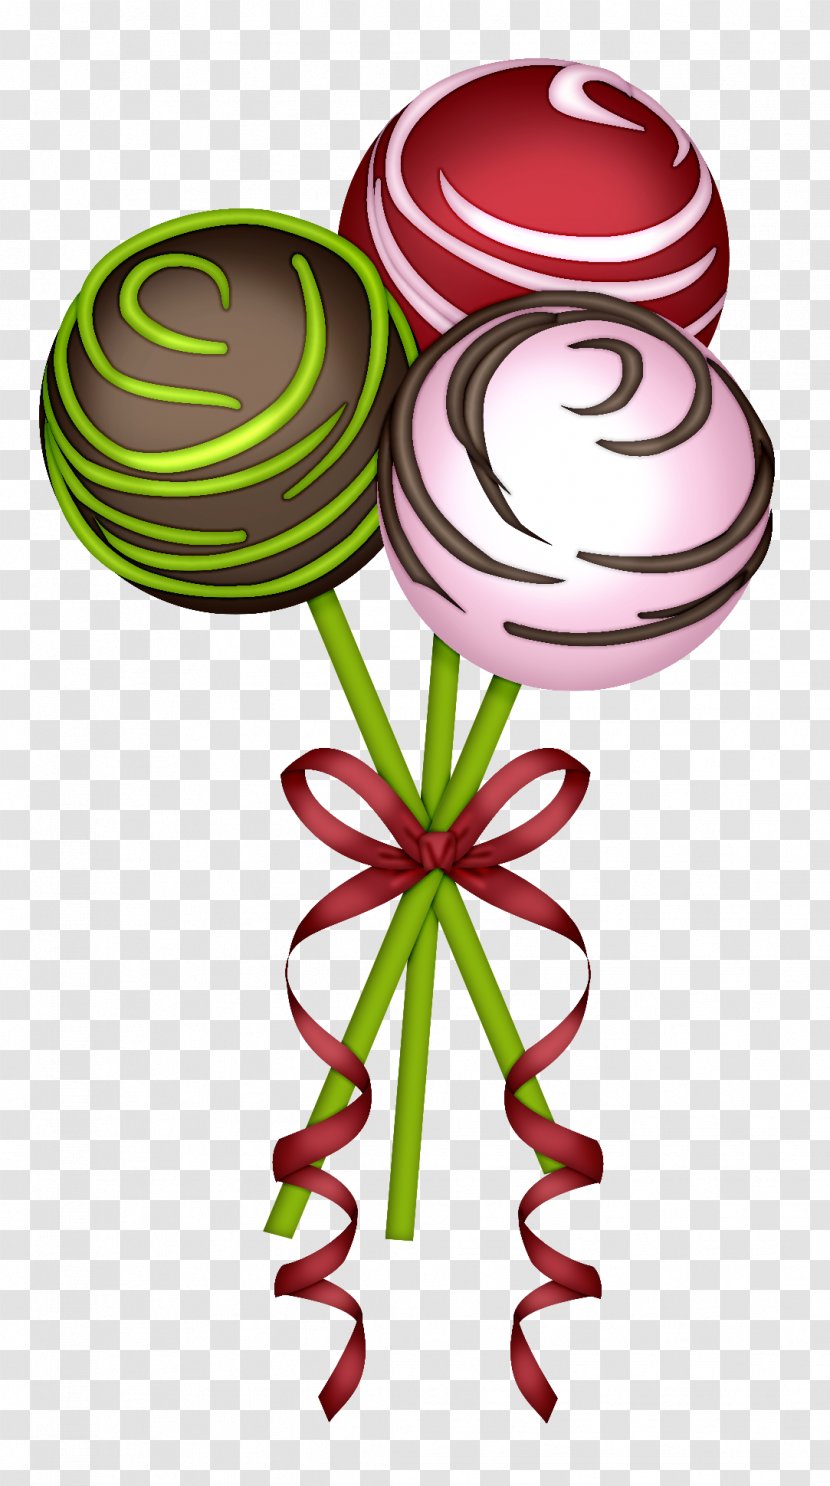 Lollipop Cupcake Frosting & Icing Clip Art Cake Pop - Peppermints Insignia Transparent PNG